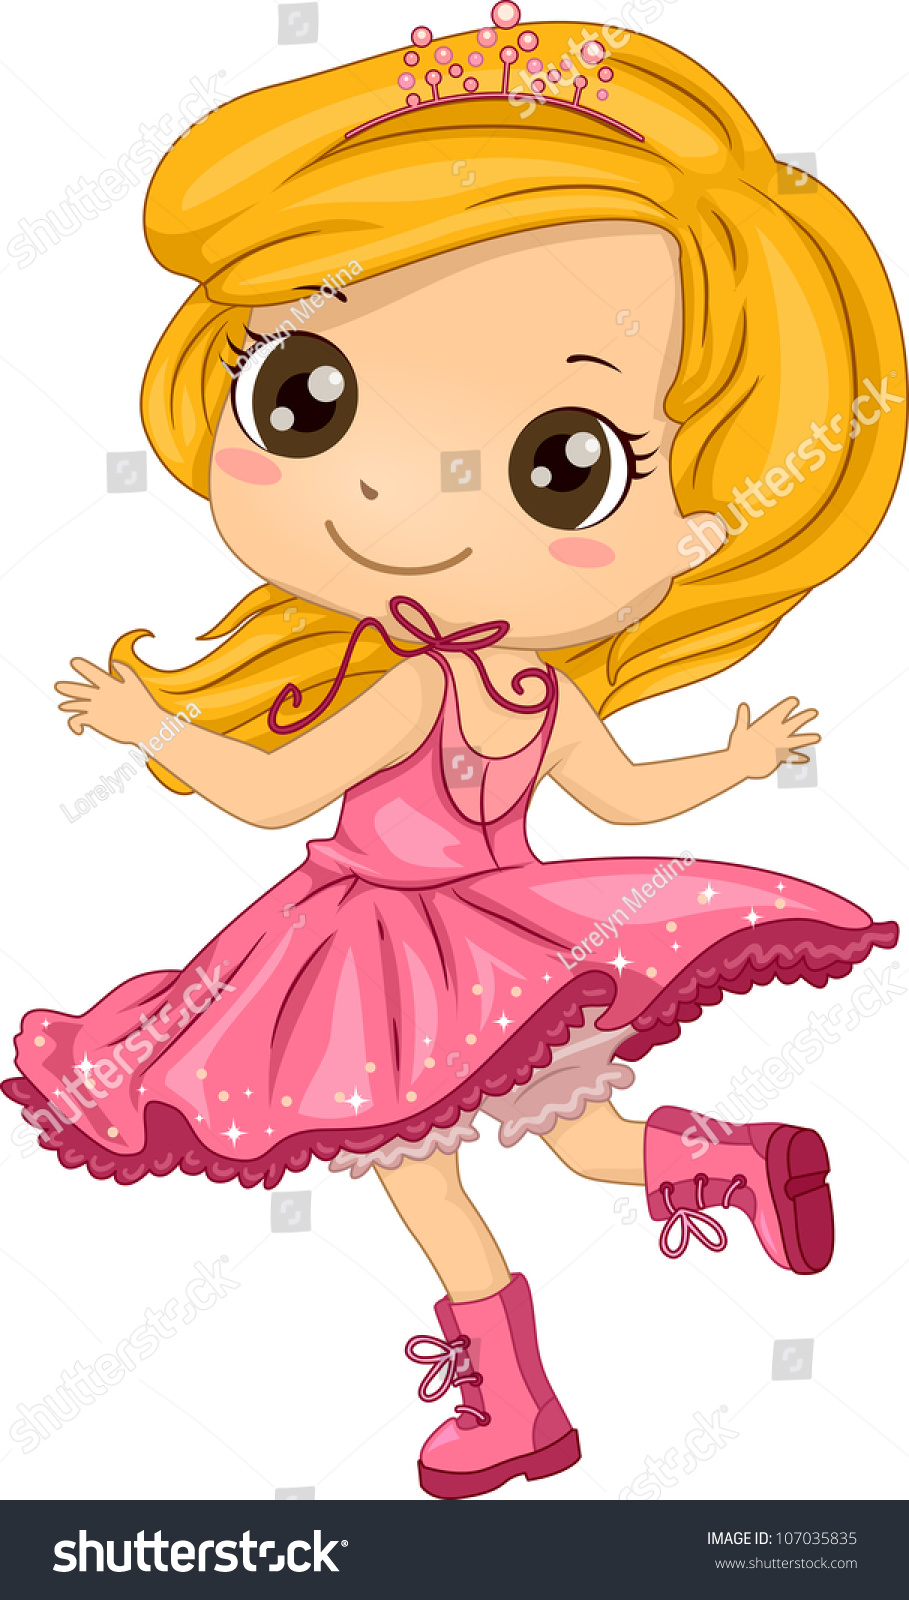 Illustration Featuring Girl Wearing Punk Outfit Stock Vector (royalty 